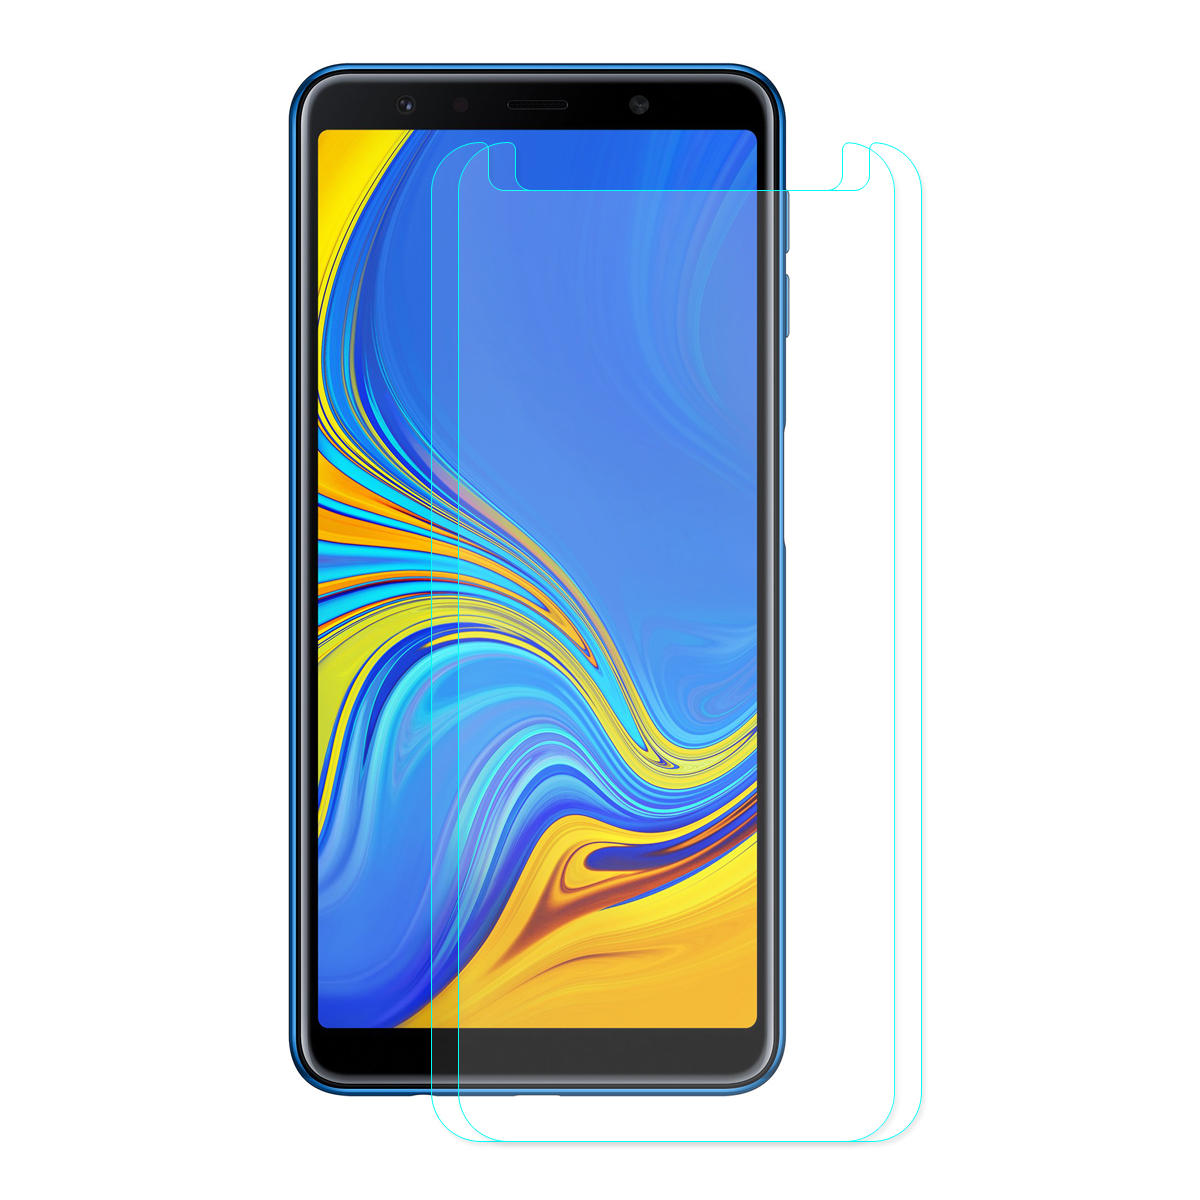 2 Packs Enkay Screen Protector For Samsung Galaxy A7 2018 2.5D Curved Edge Tempered Glass Film COD